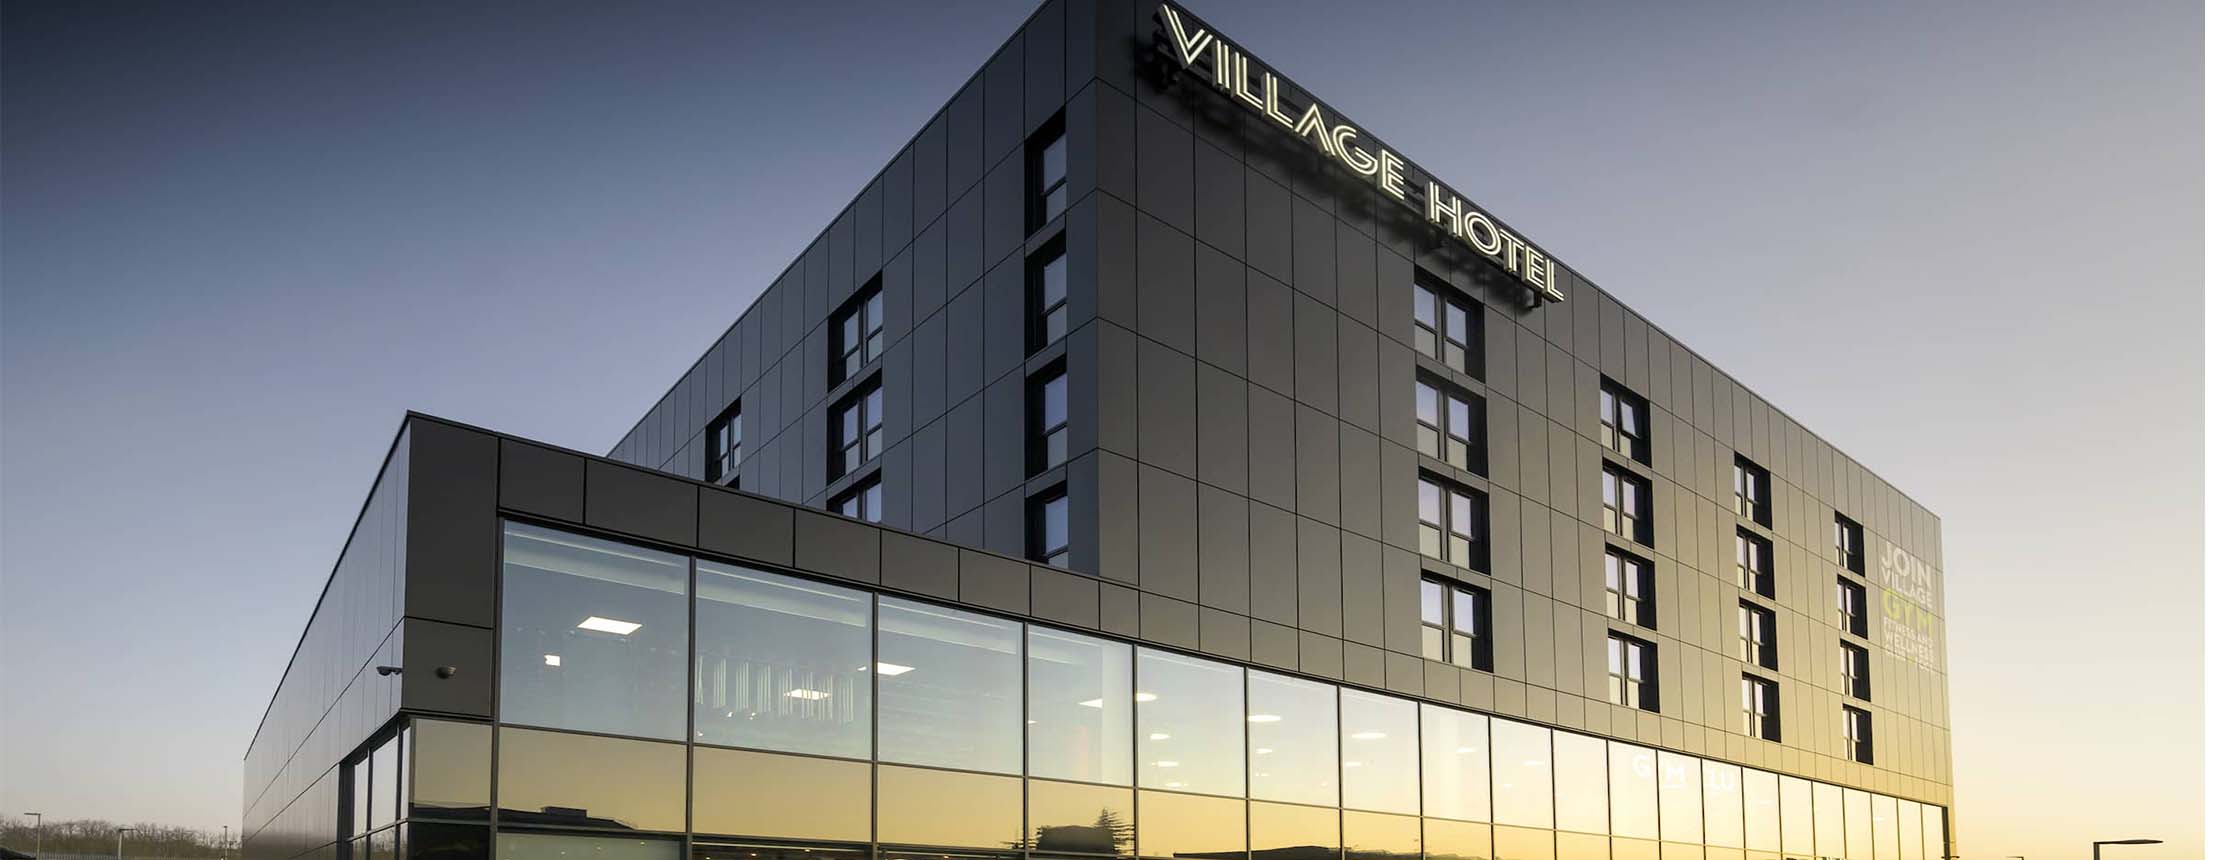 Southampton fc joins forces with village hotel to promote healthy lifestyles to its fans